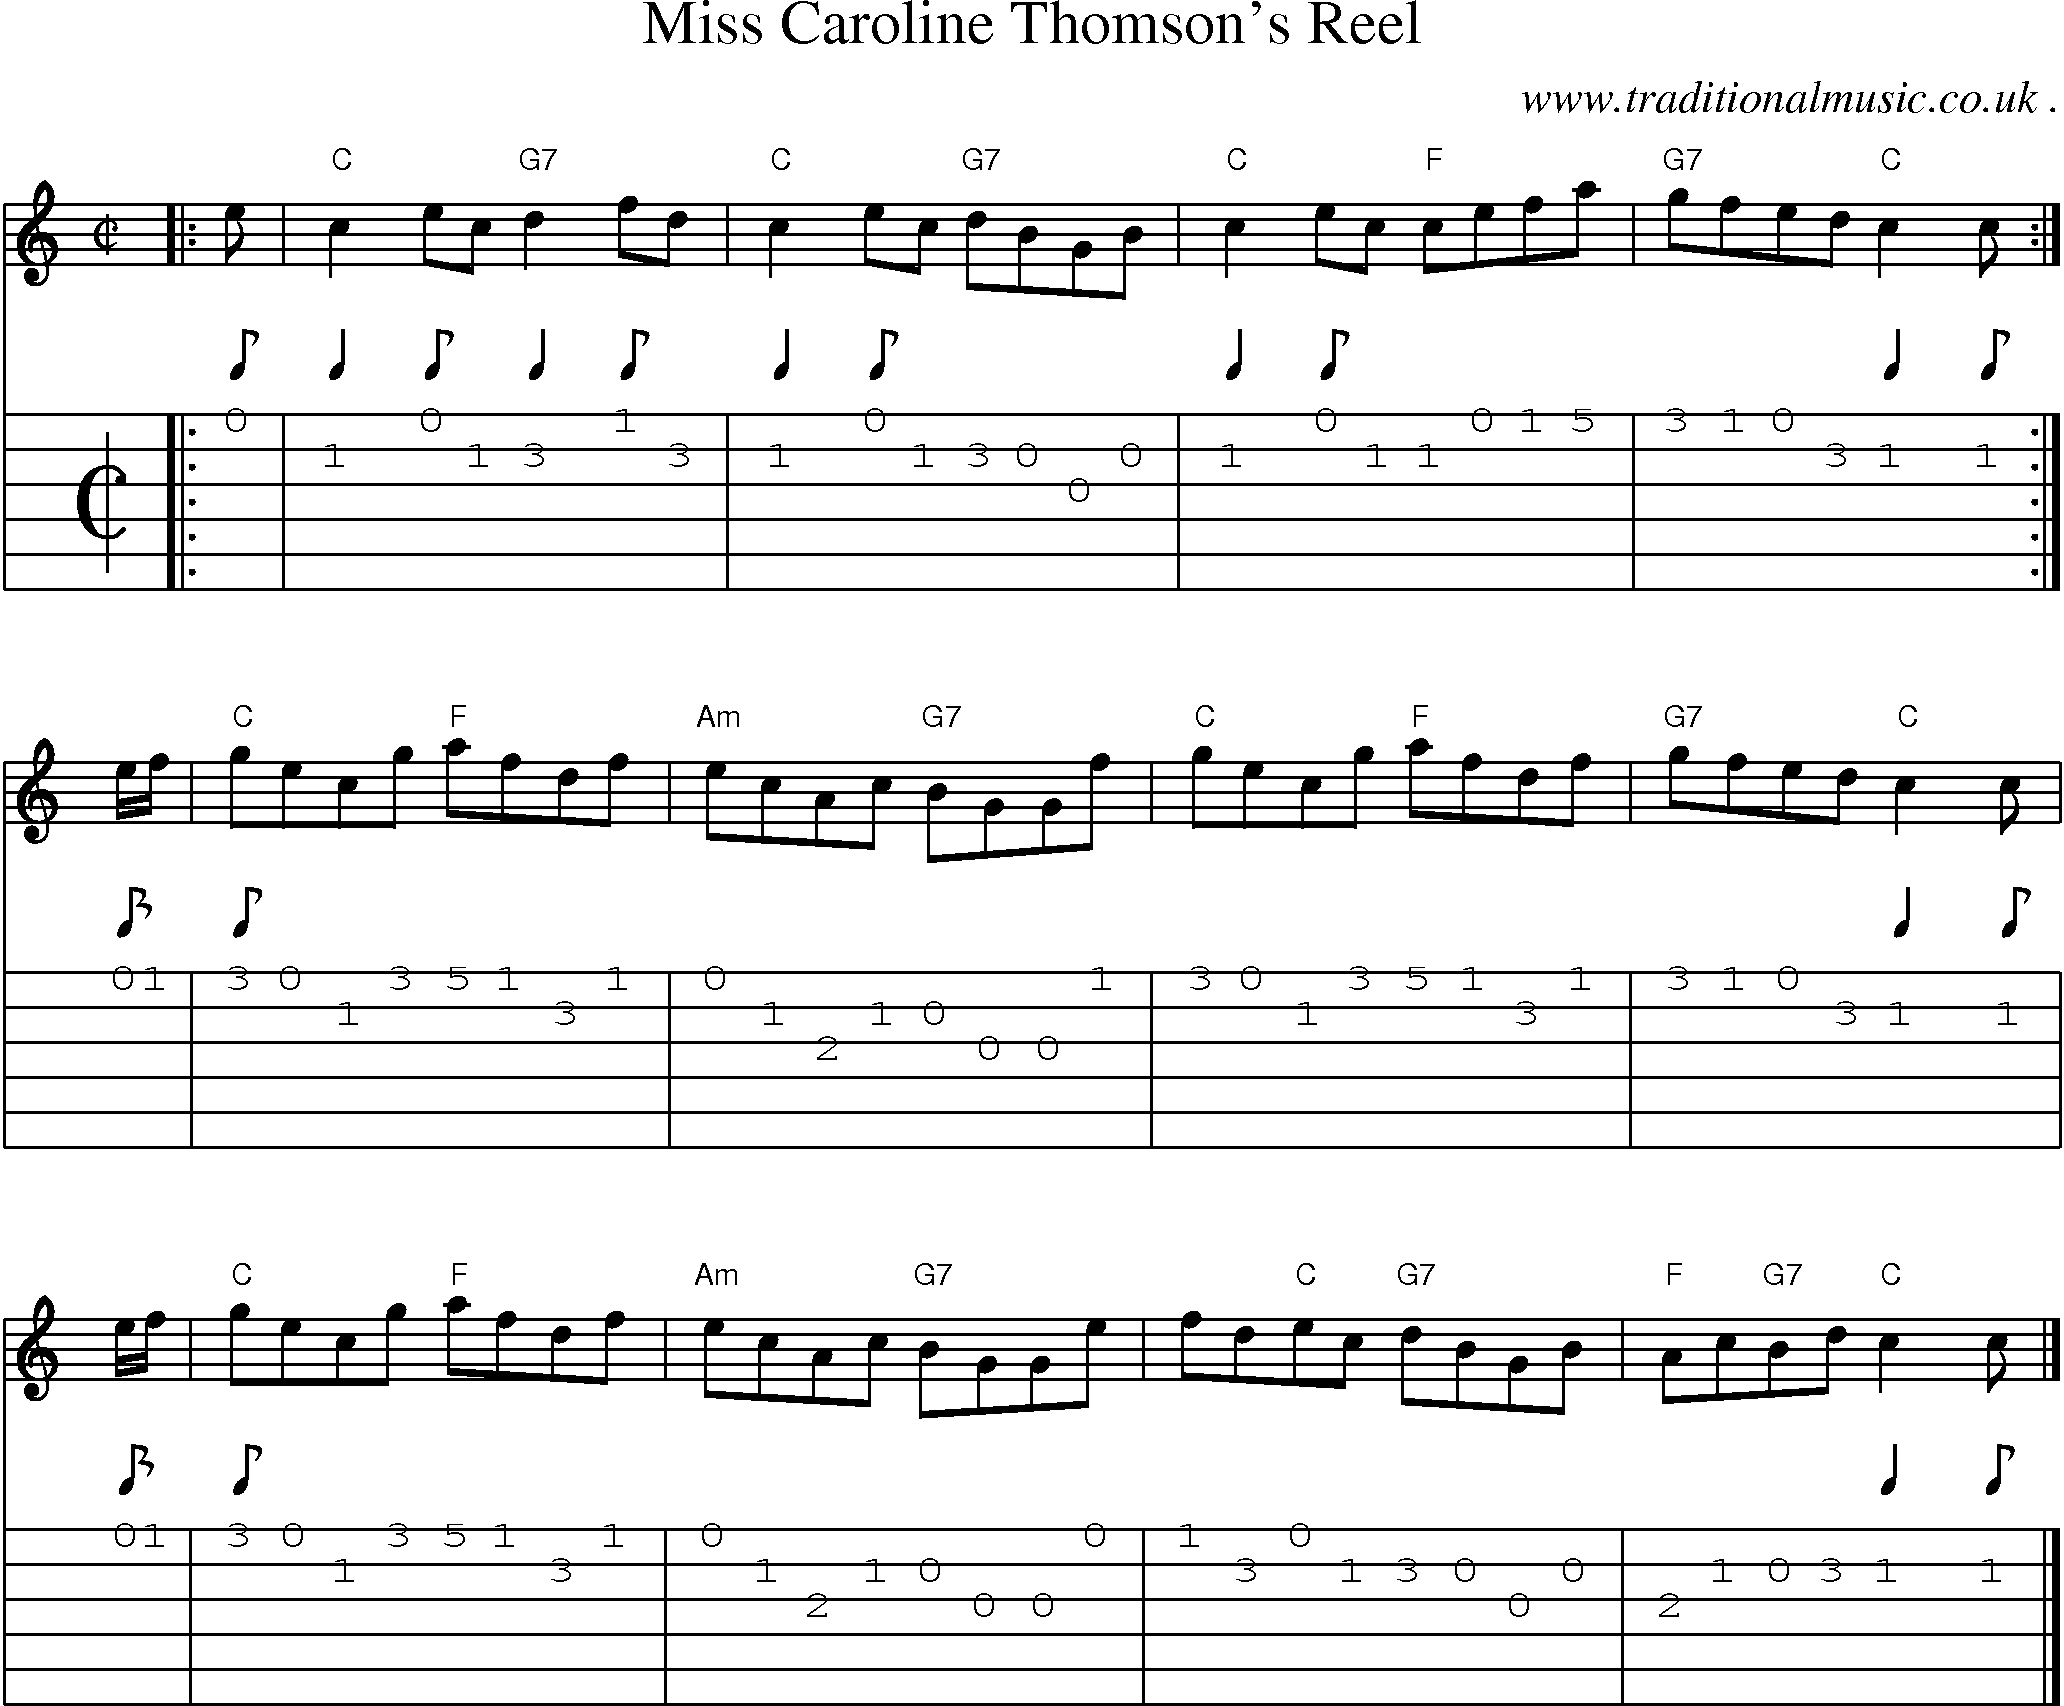 Sheet-music  score, Chords and Guitar Tabs for Miss Caroline Thomsons Reel